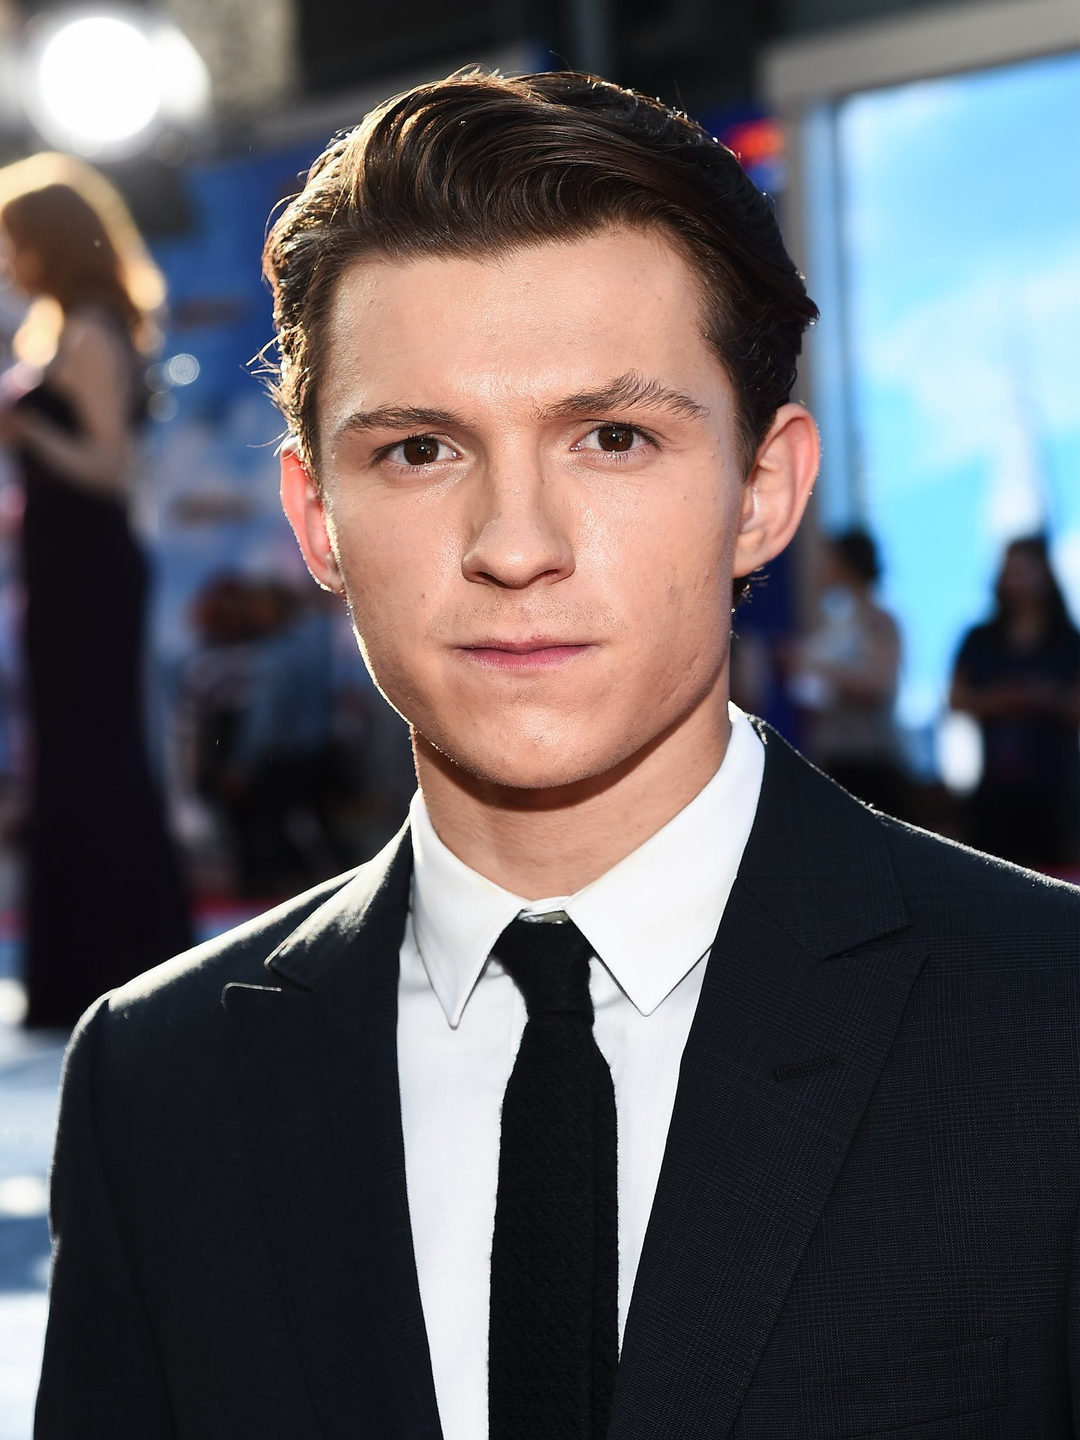 Tom Holland who is his father